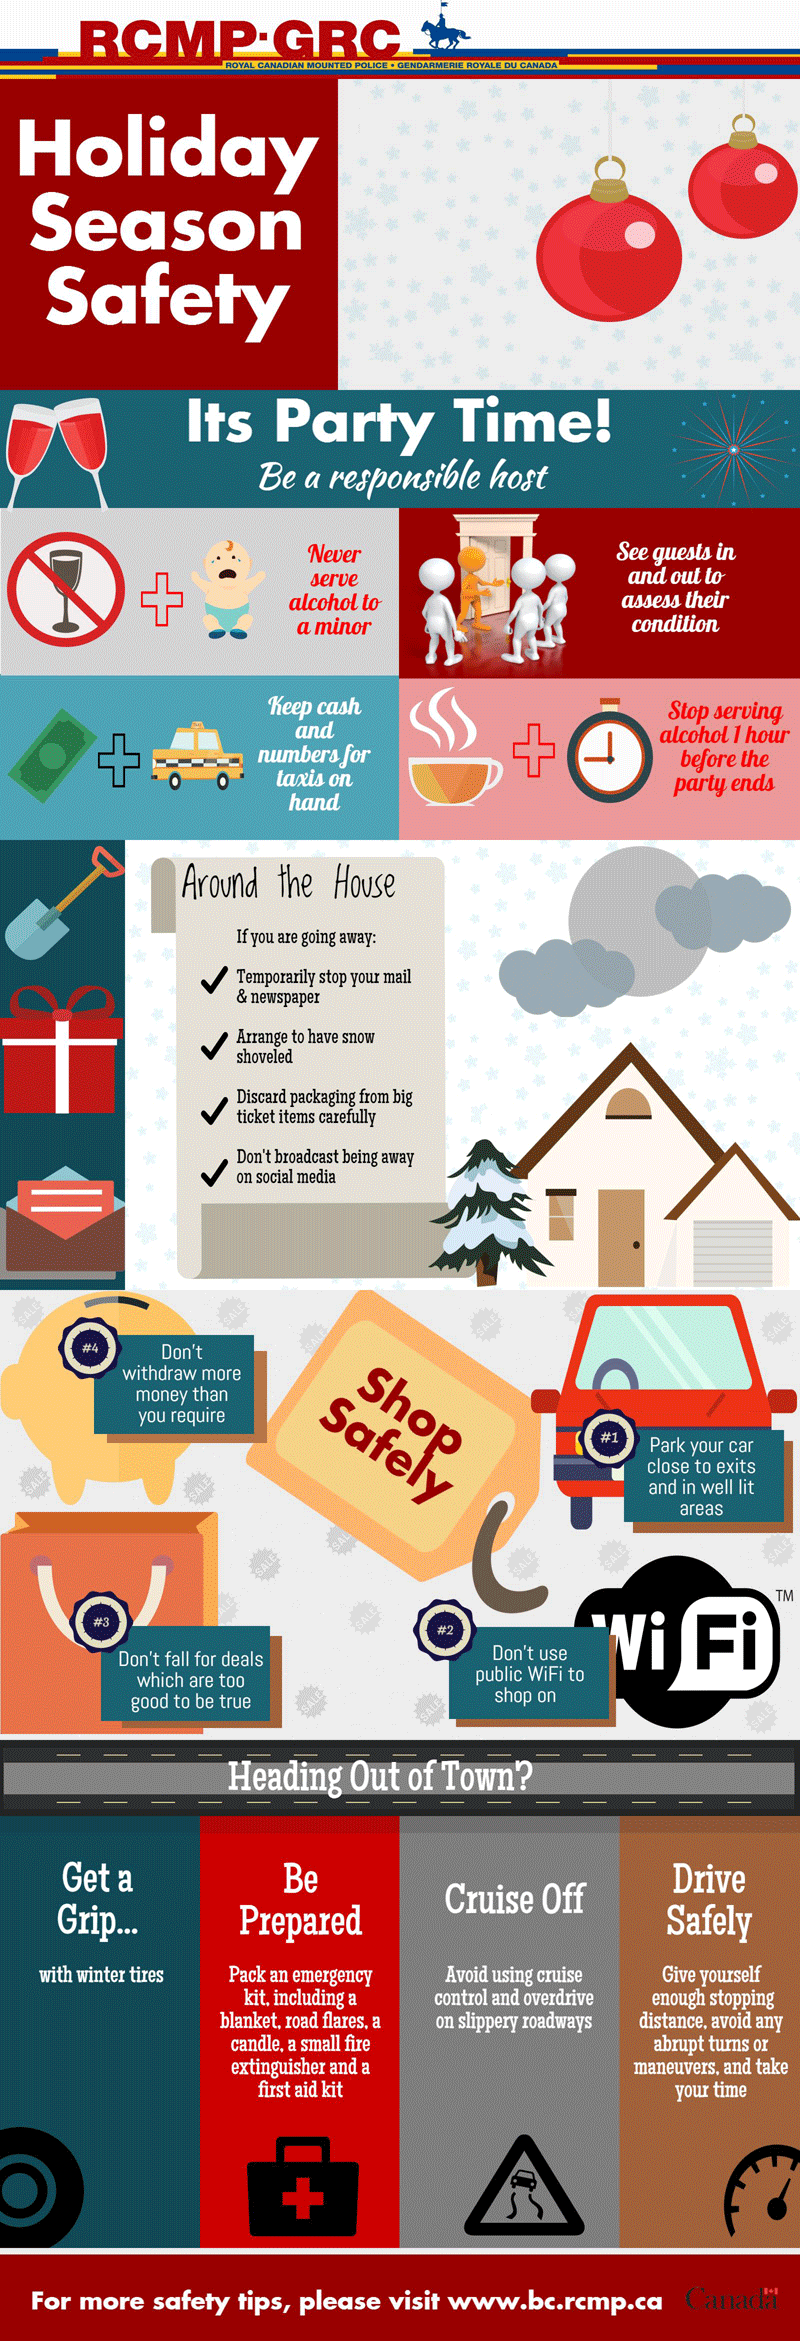 Image of Holiday Season Safety tip